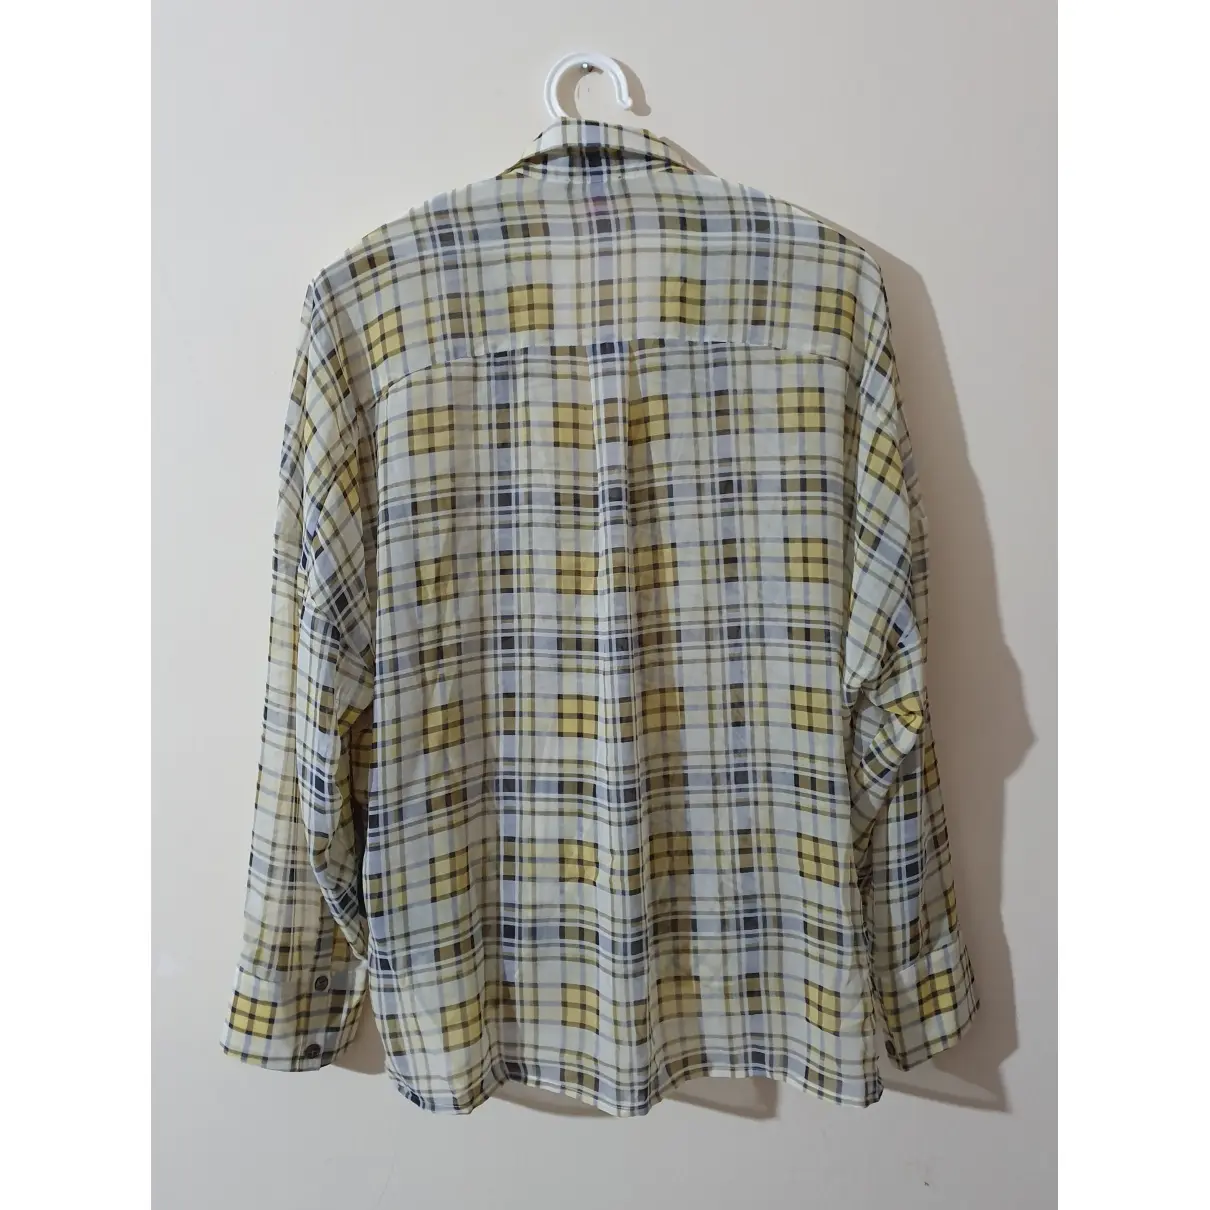 Vince  Camuto Blouse for sale